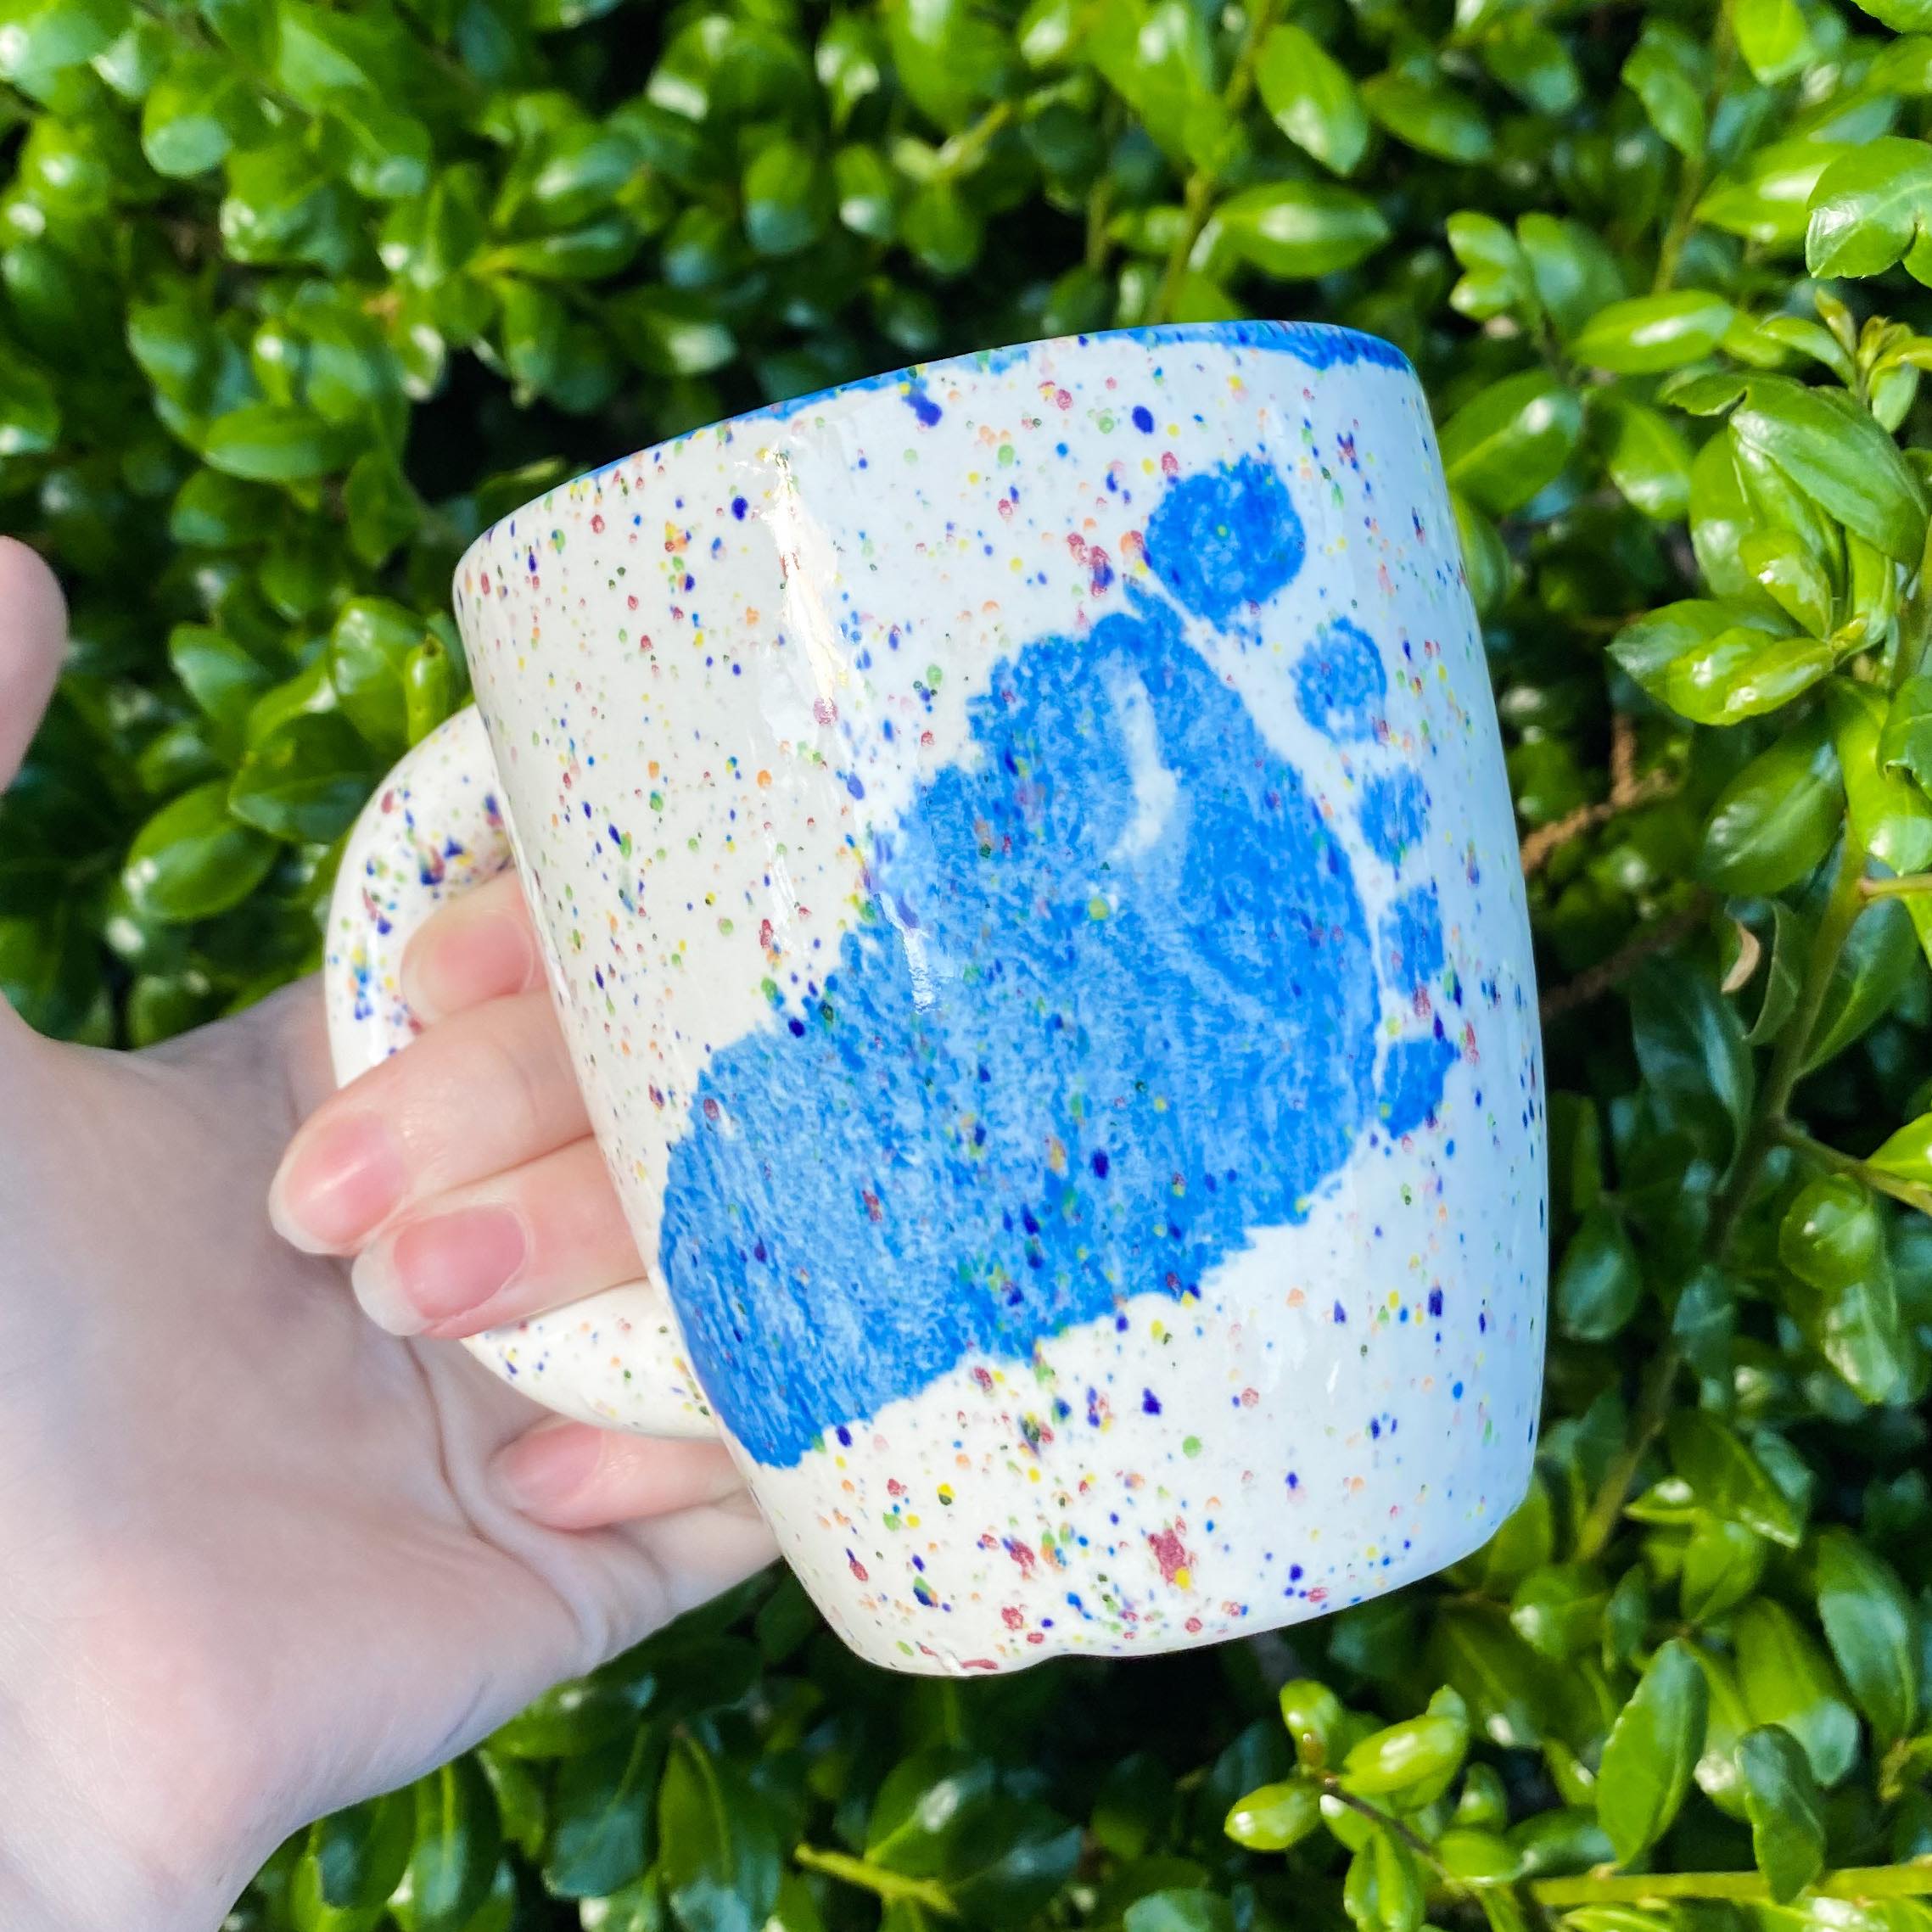 A person holding a coffee mug with blue paint on it.